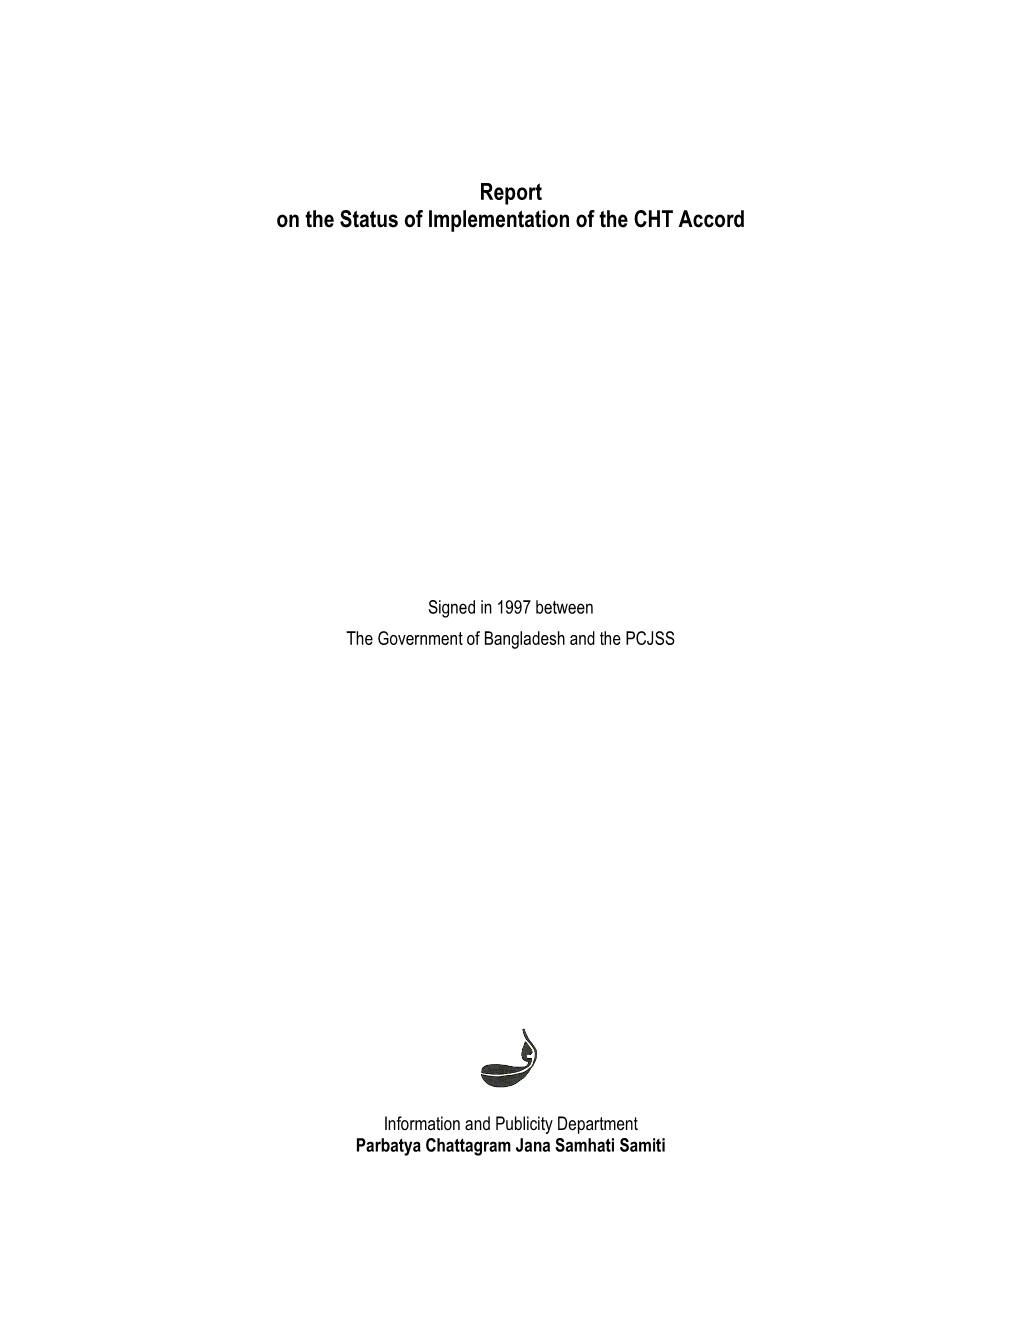 Report on the Status of Implementation of the CHT Accord